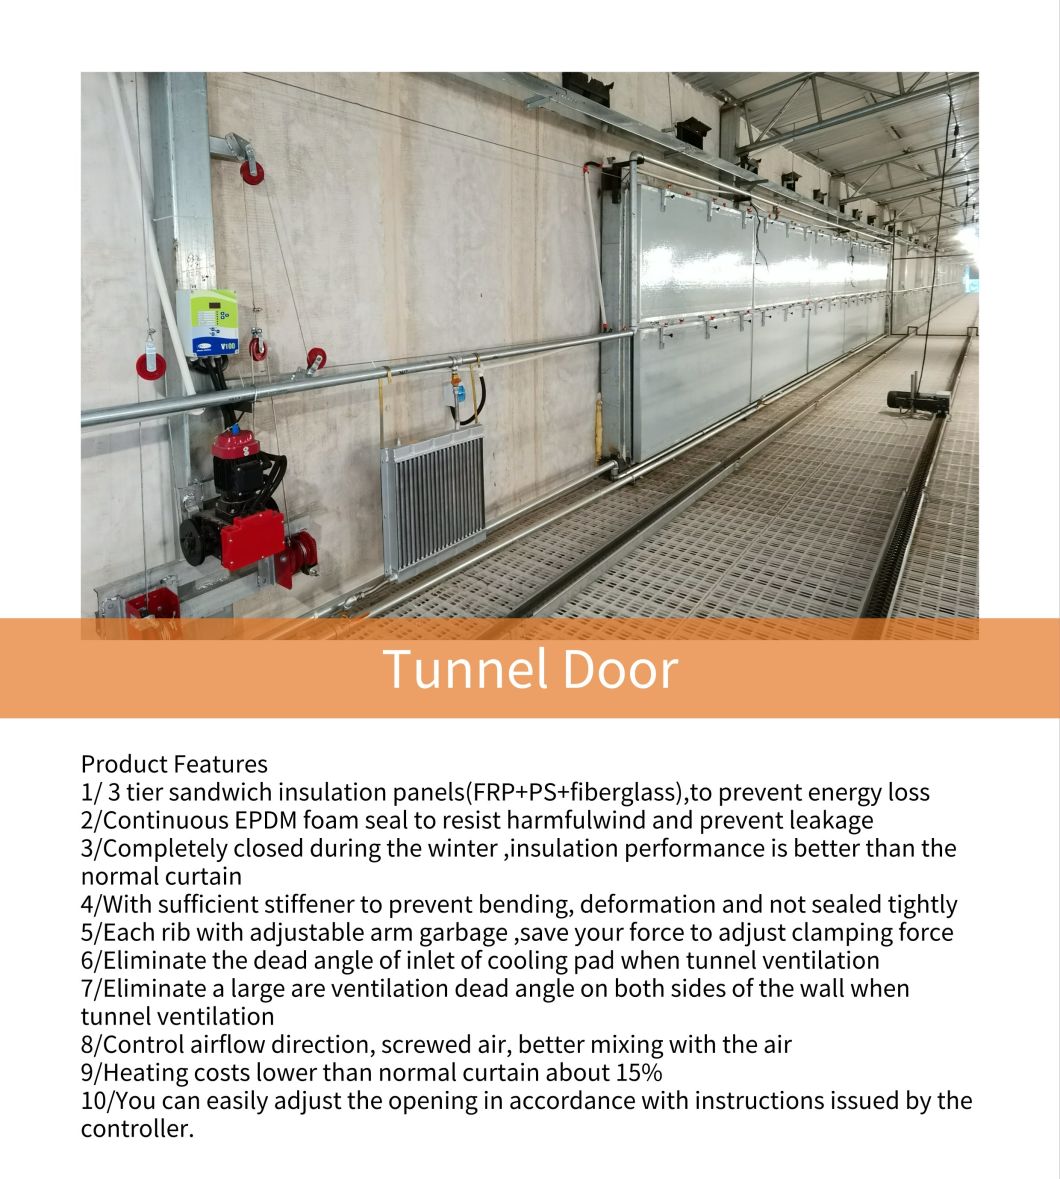 Poultry Equipment Laying Hens Ventilation Tunnel Door Laying Hens Poultry Farming Poultry Equipment Tunnel Door